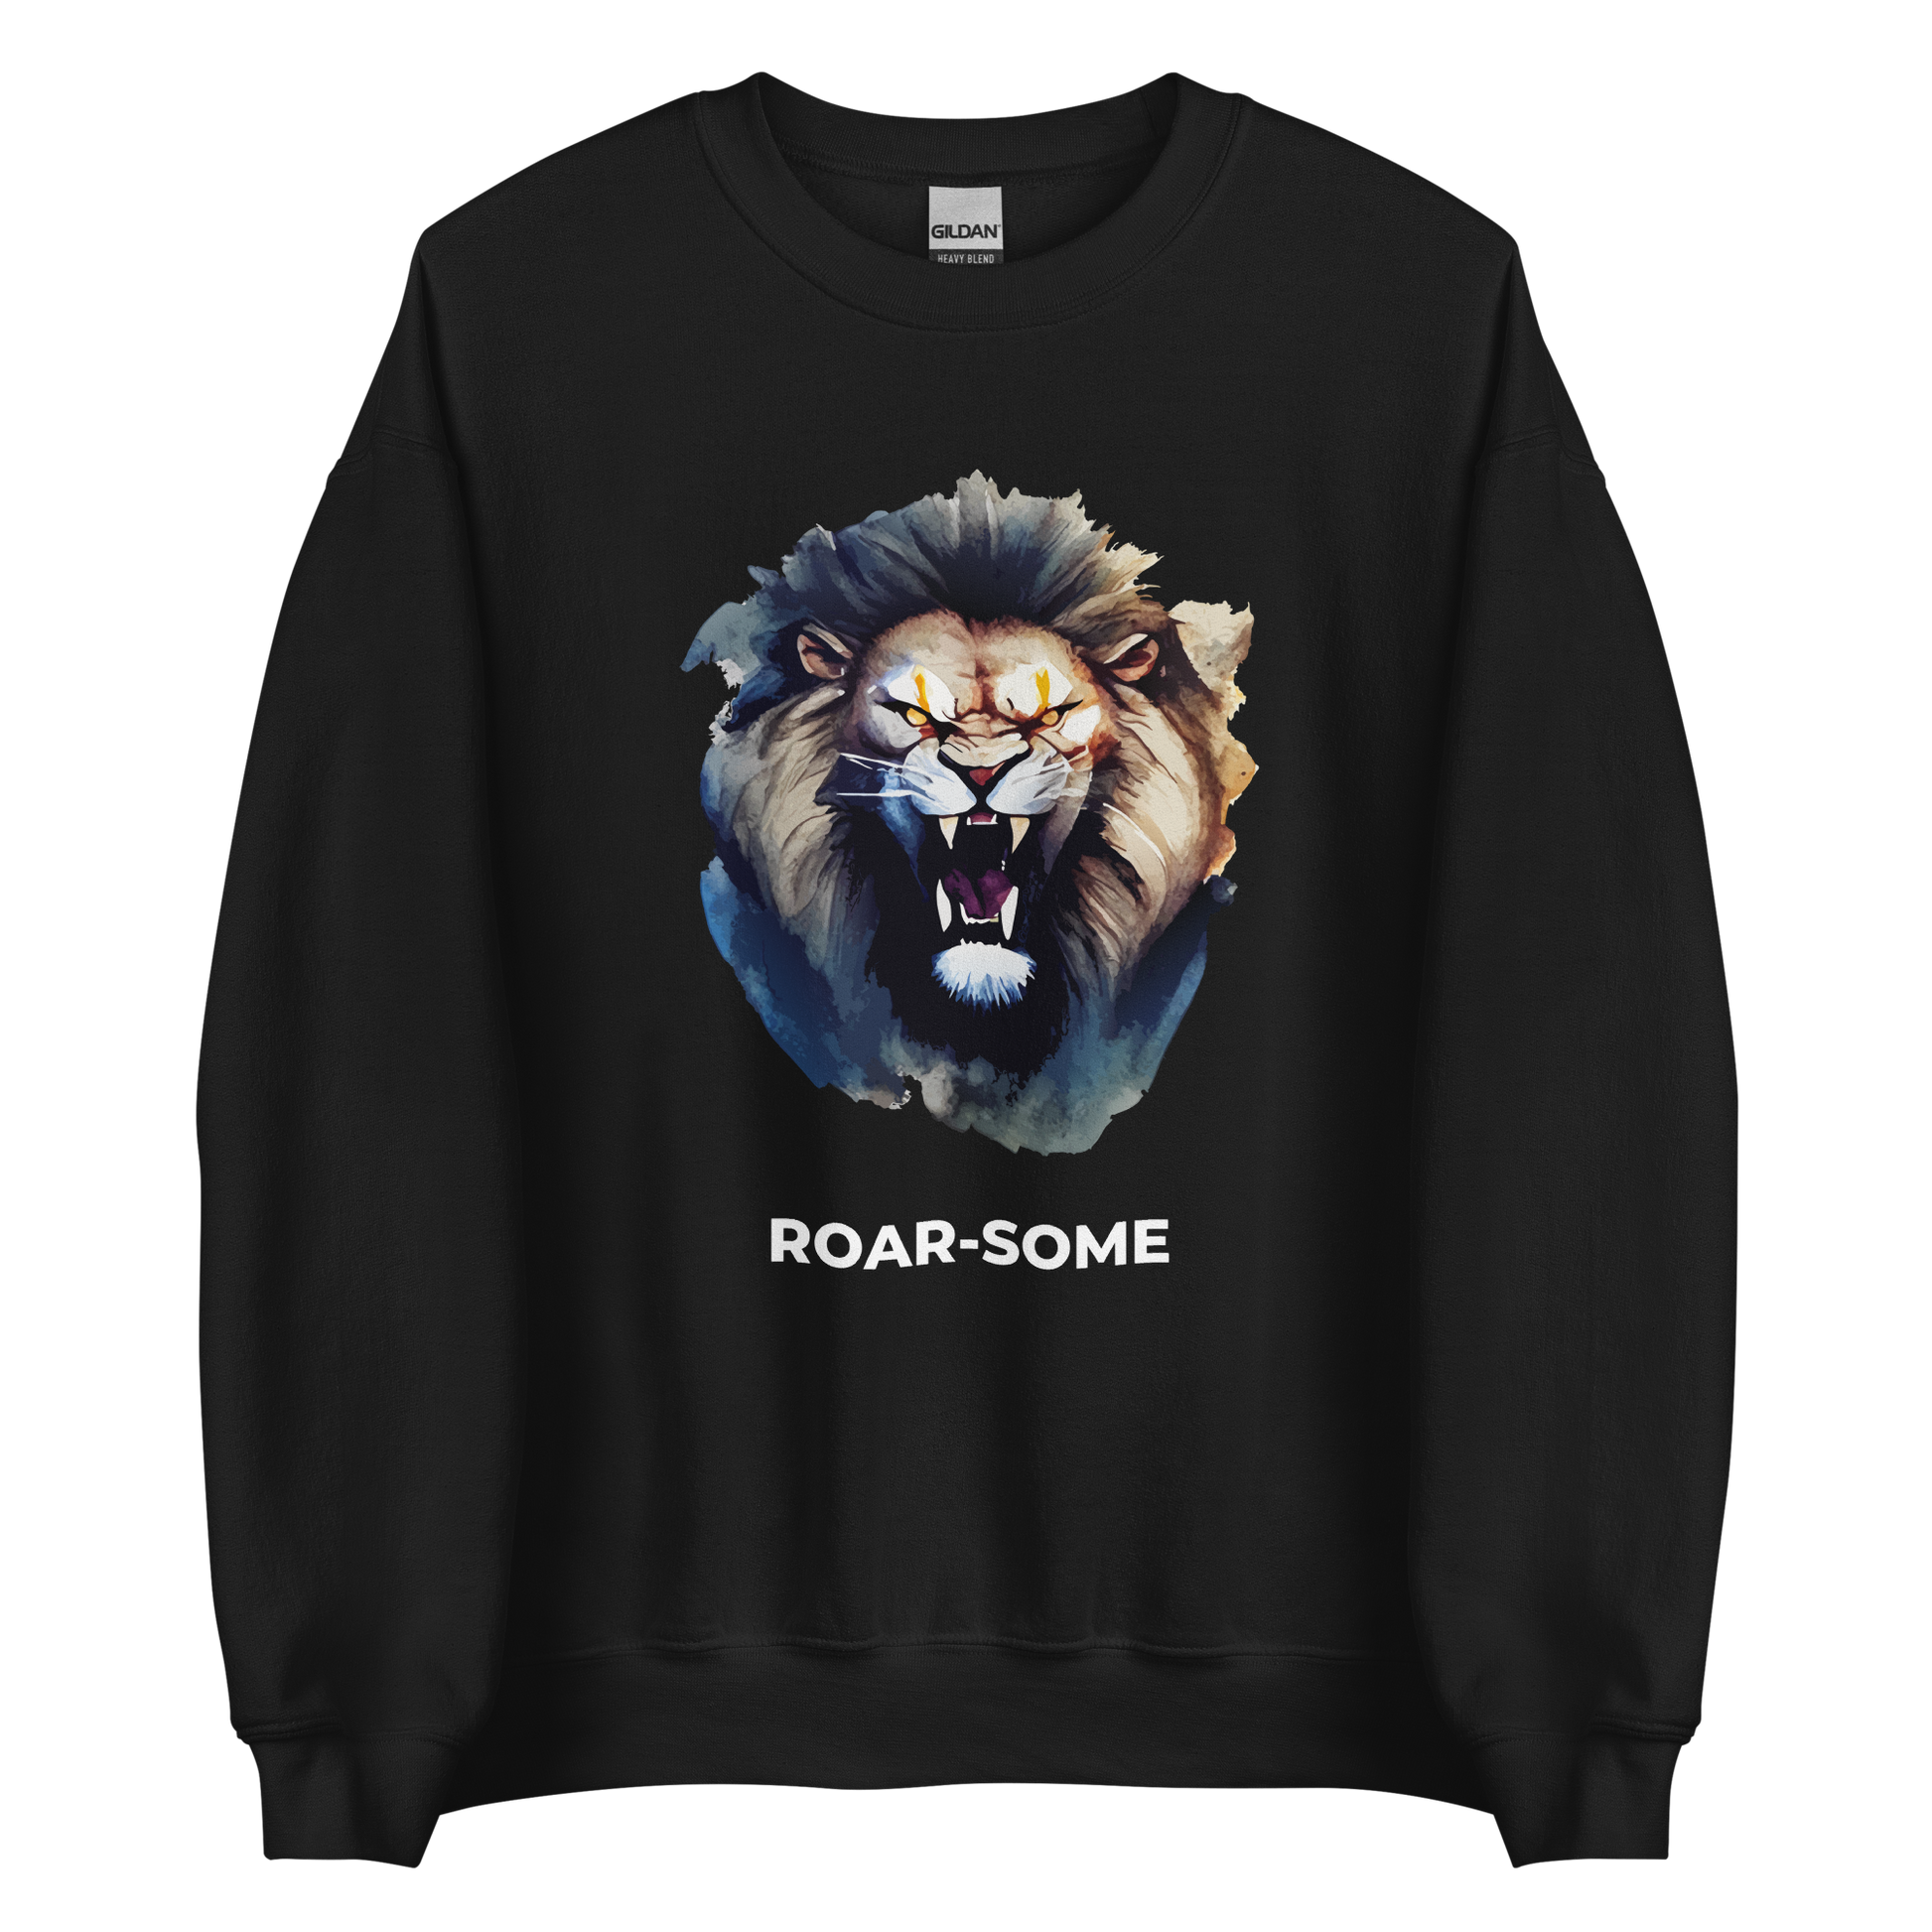 Black Lion Sweatshirt featuring a Roar-Some graphic on the chest - Cool Graphic Lion Sweatshirts - Boozy Fox